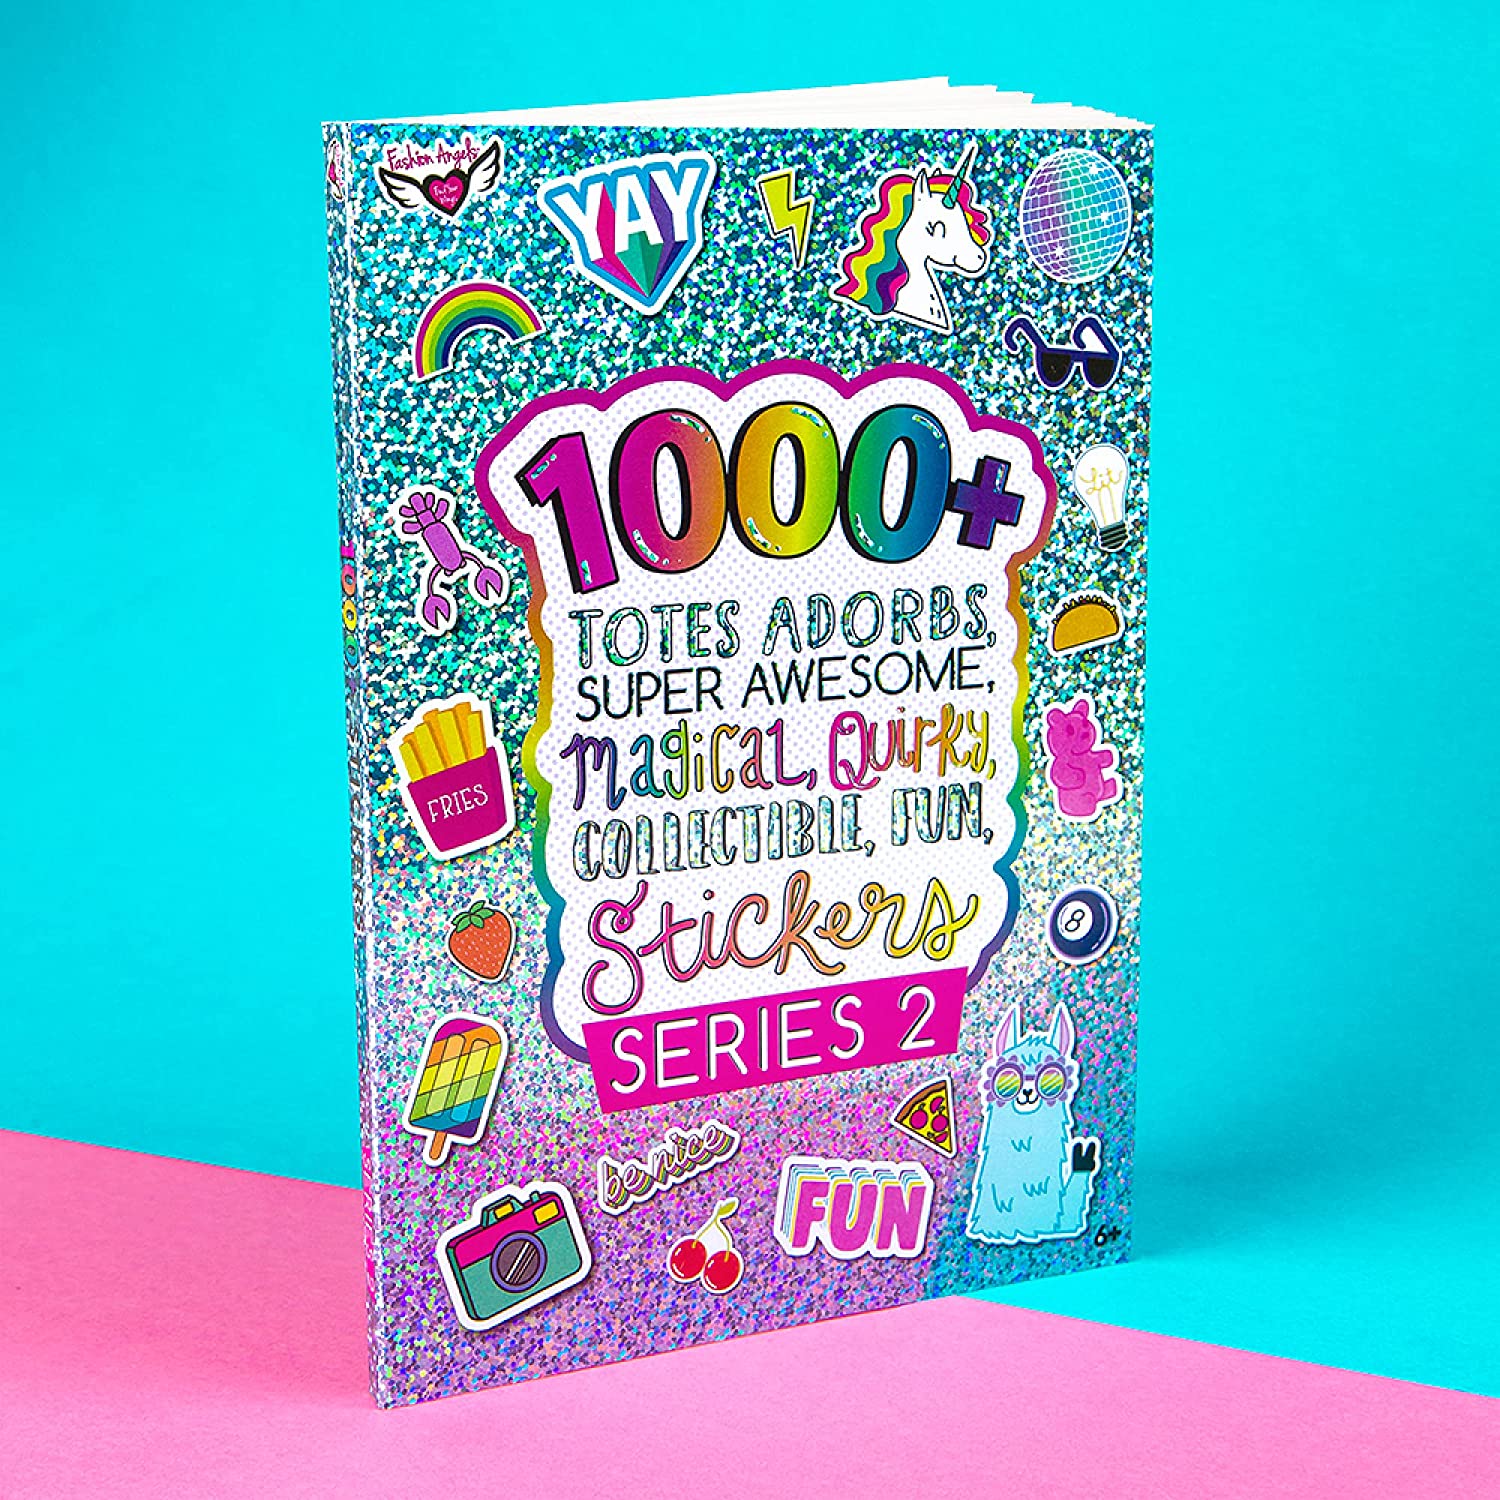 Fashion Angels 1000+ Food Stickers for Kids - Colorful & Cute Food Stickers  for Laptops, Luggages, Journals, Notebooks & Greeting Cards, 40-Page  Sticker Book for Kids Ages 6 and Up 